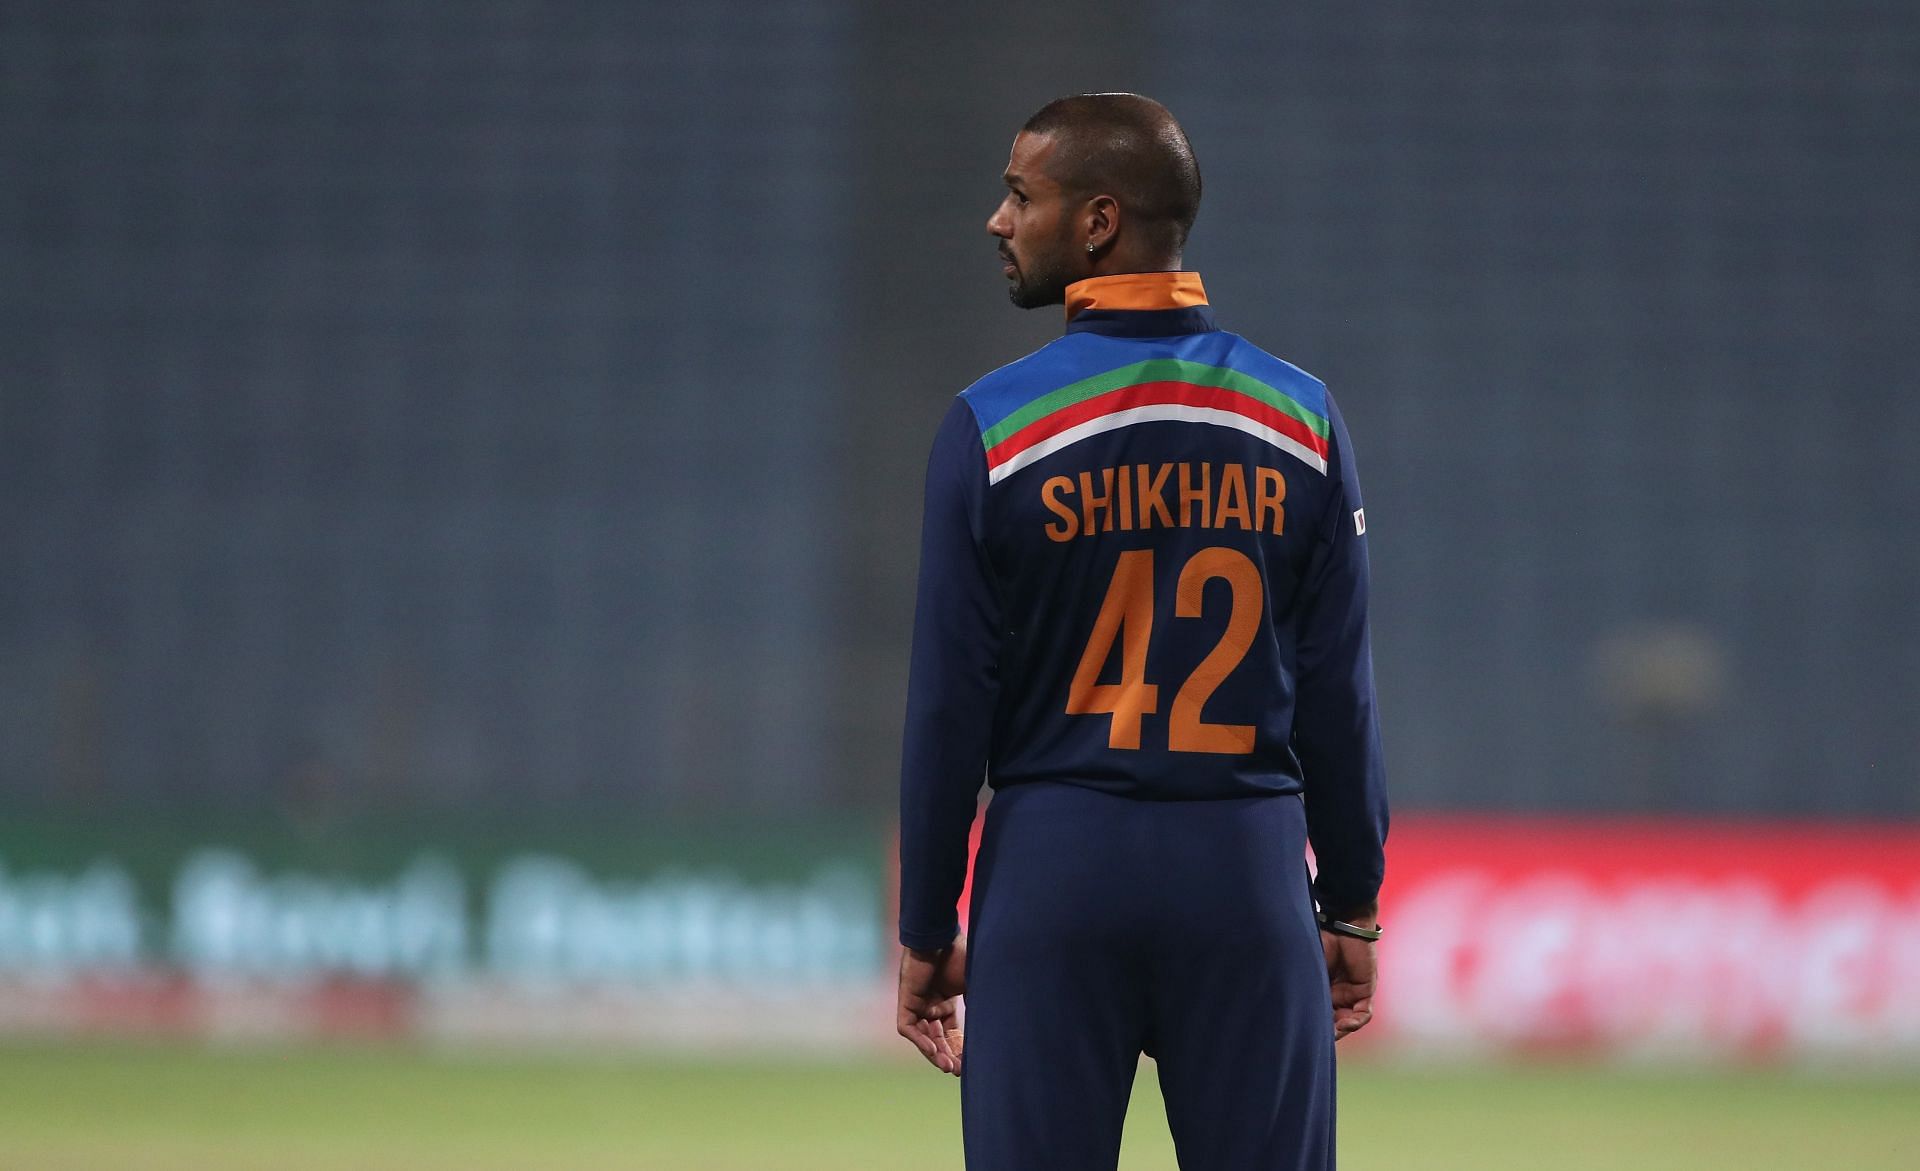 Dhawan was the highest run-getter in the last edition